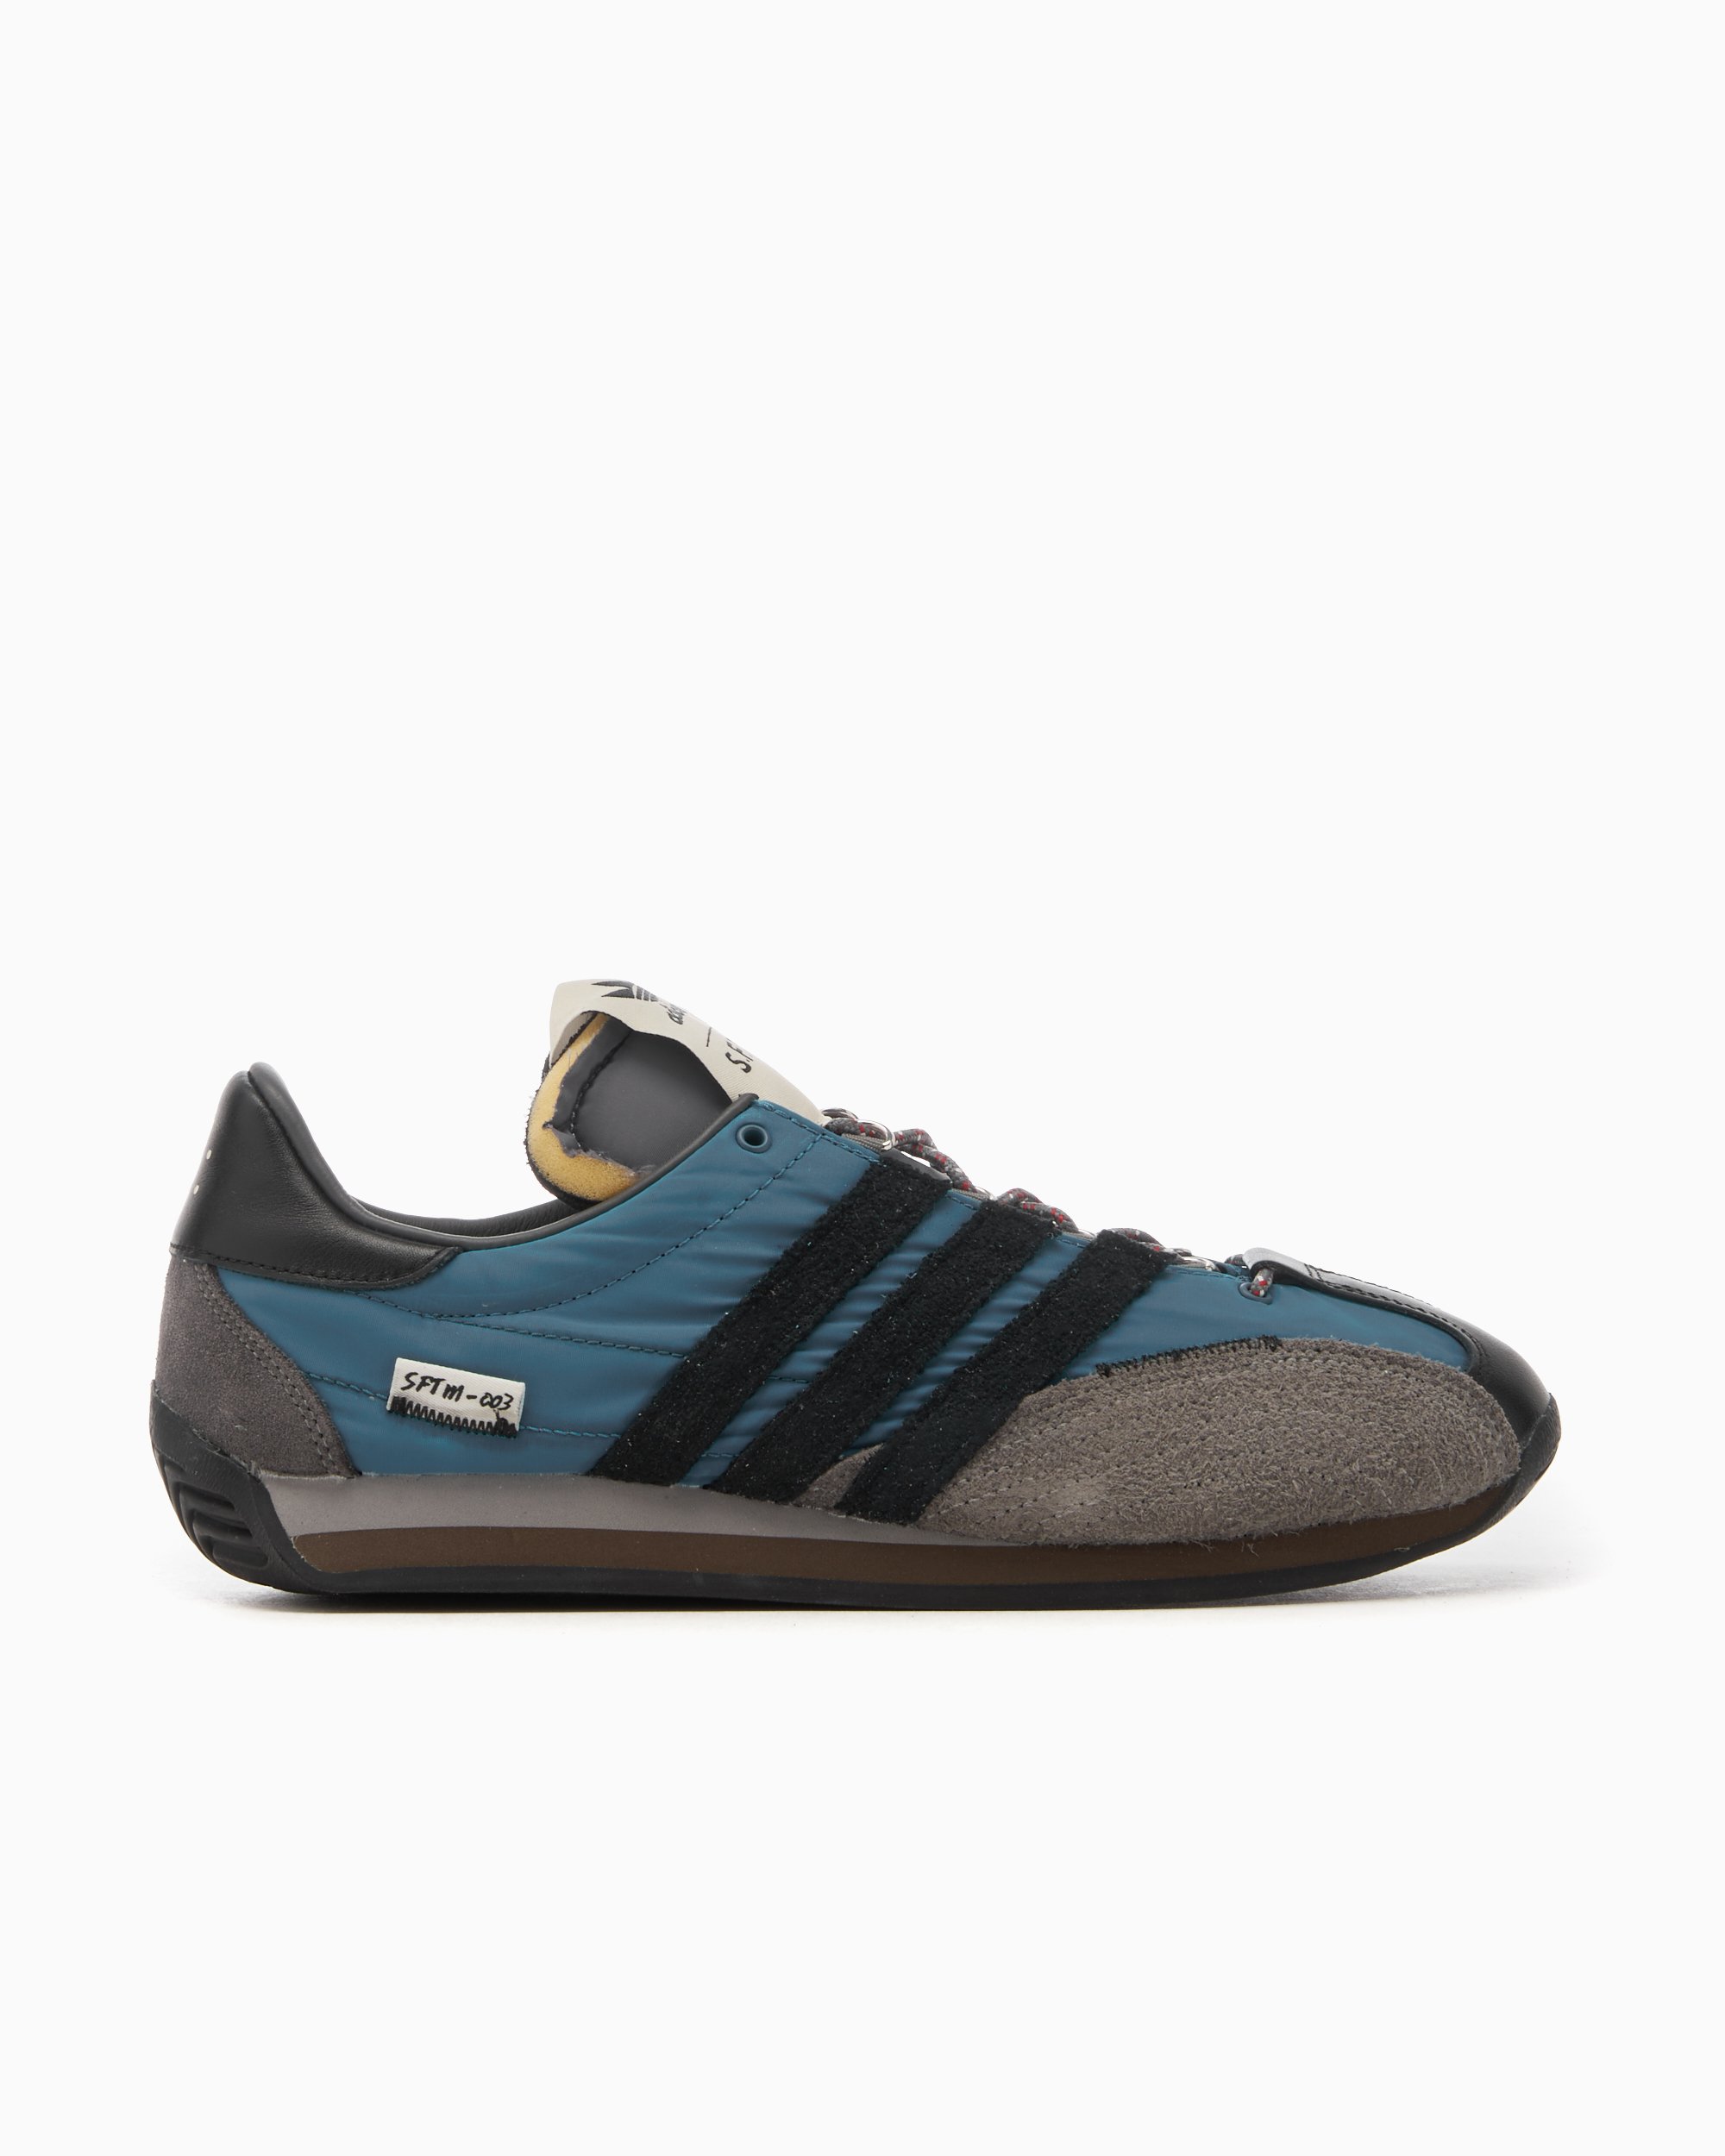 adidas Originals x Song For The Mute Country OG Black, Blue, Gray